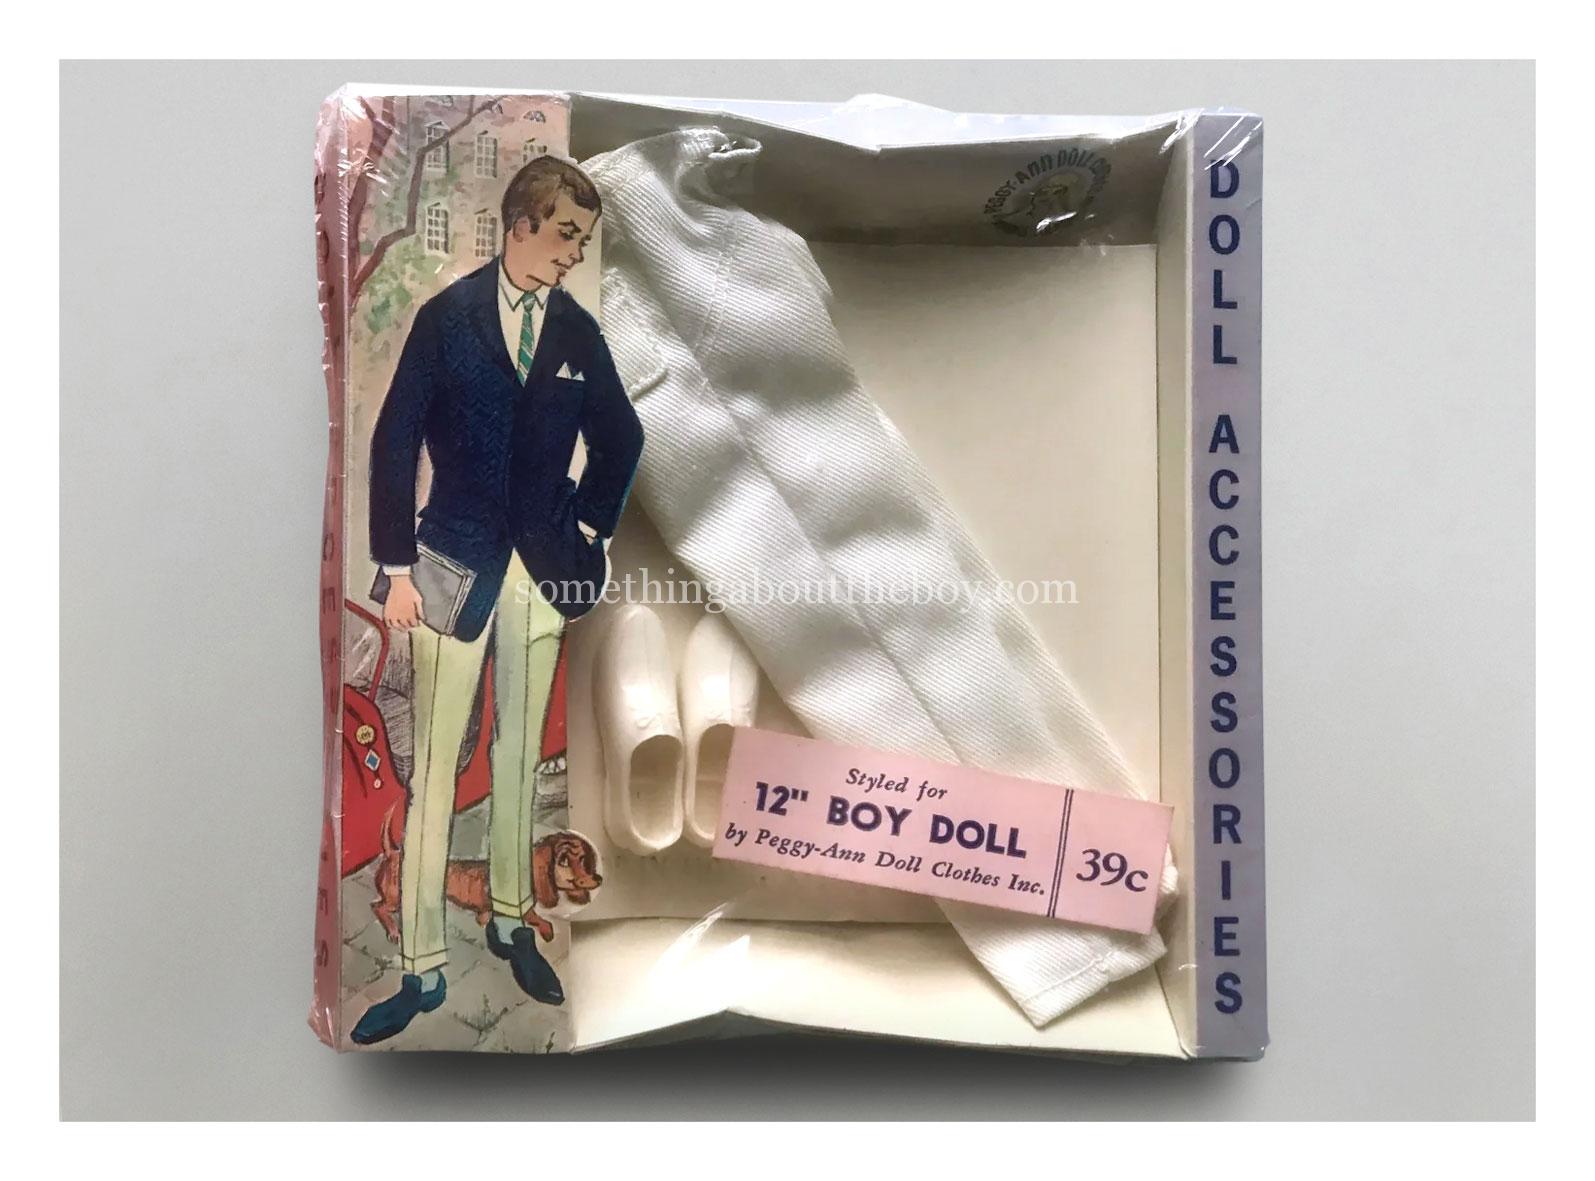 Slacks and shoes by Peggy-Ann Doll Clothes Inc.